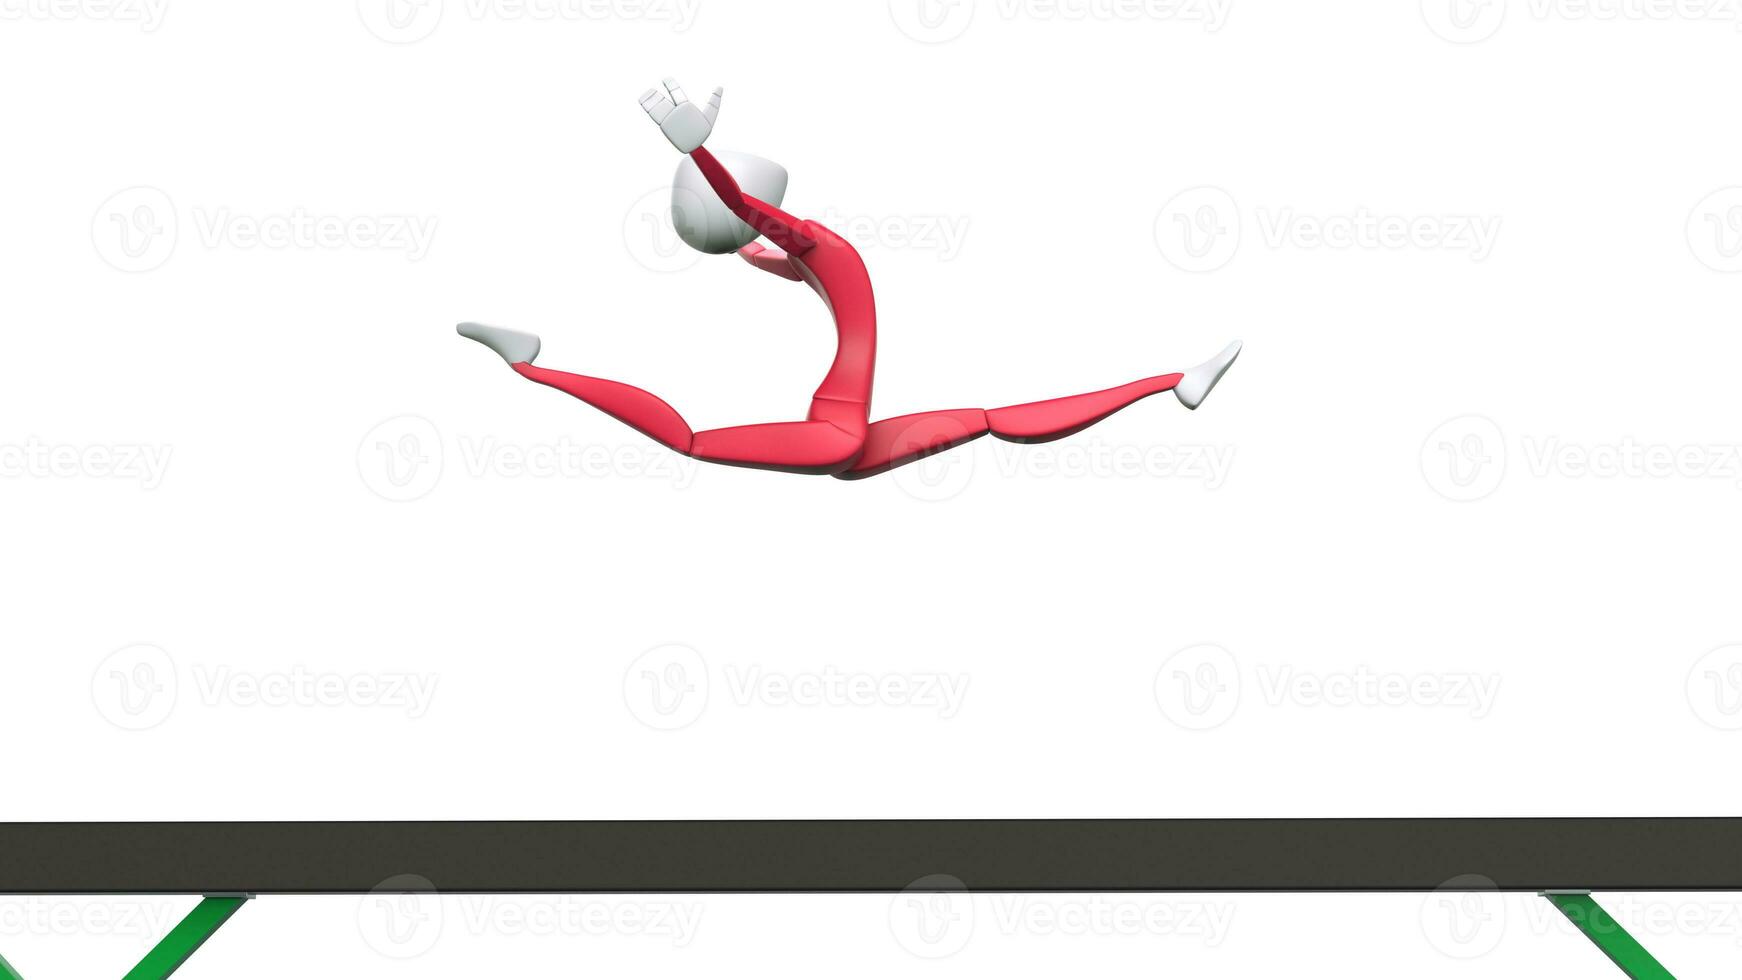 Gymnast girl - split leap - balance beam - red outfit - 3D Illustration photo